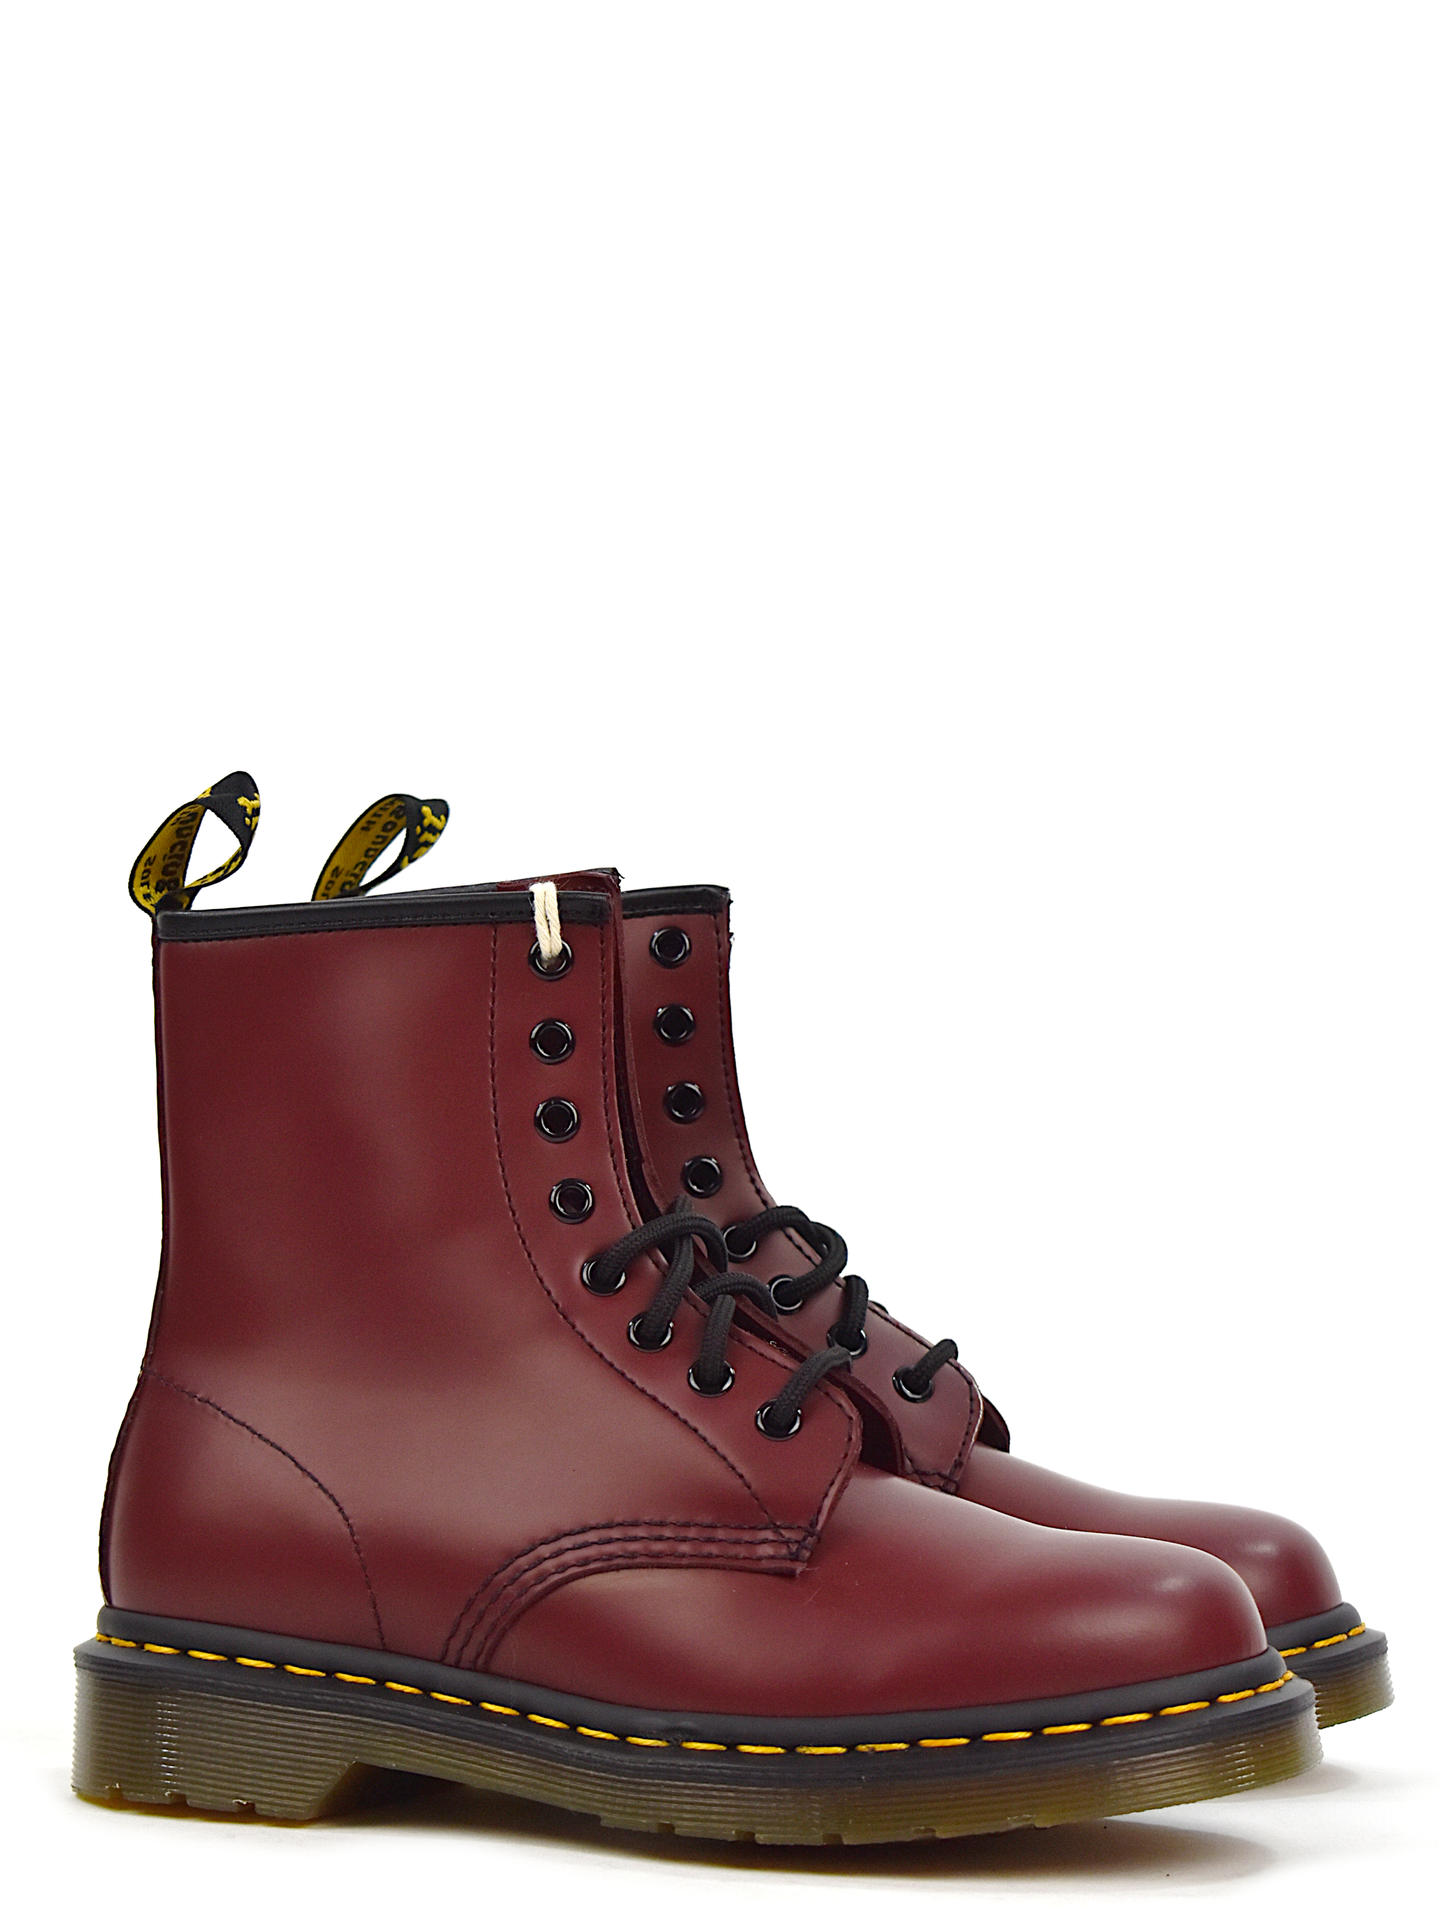 STIVALETTO BASSO DR.MARTENS 1460WSMOOTH BORDEAUX